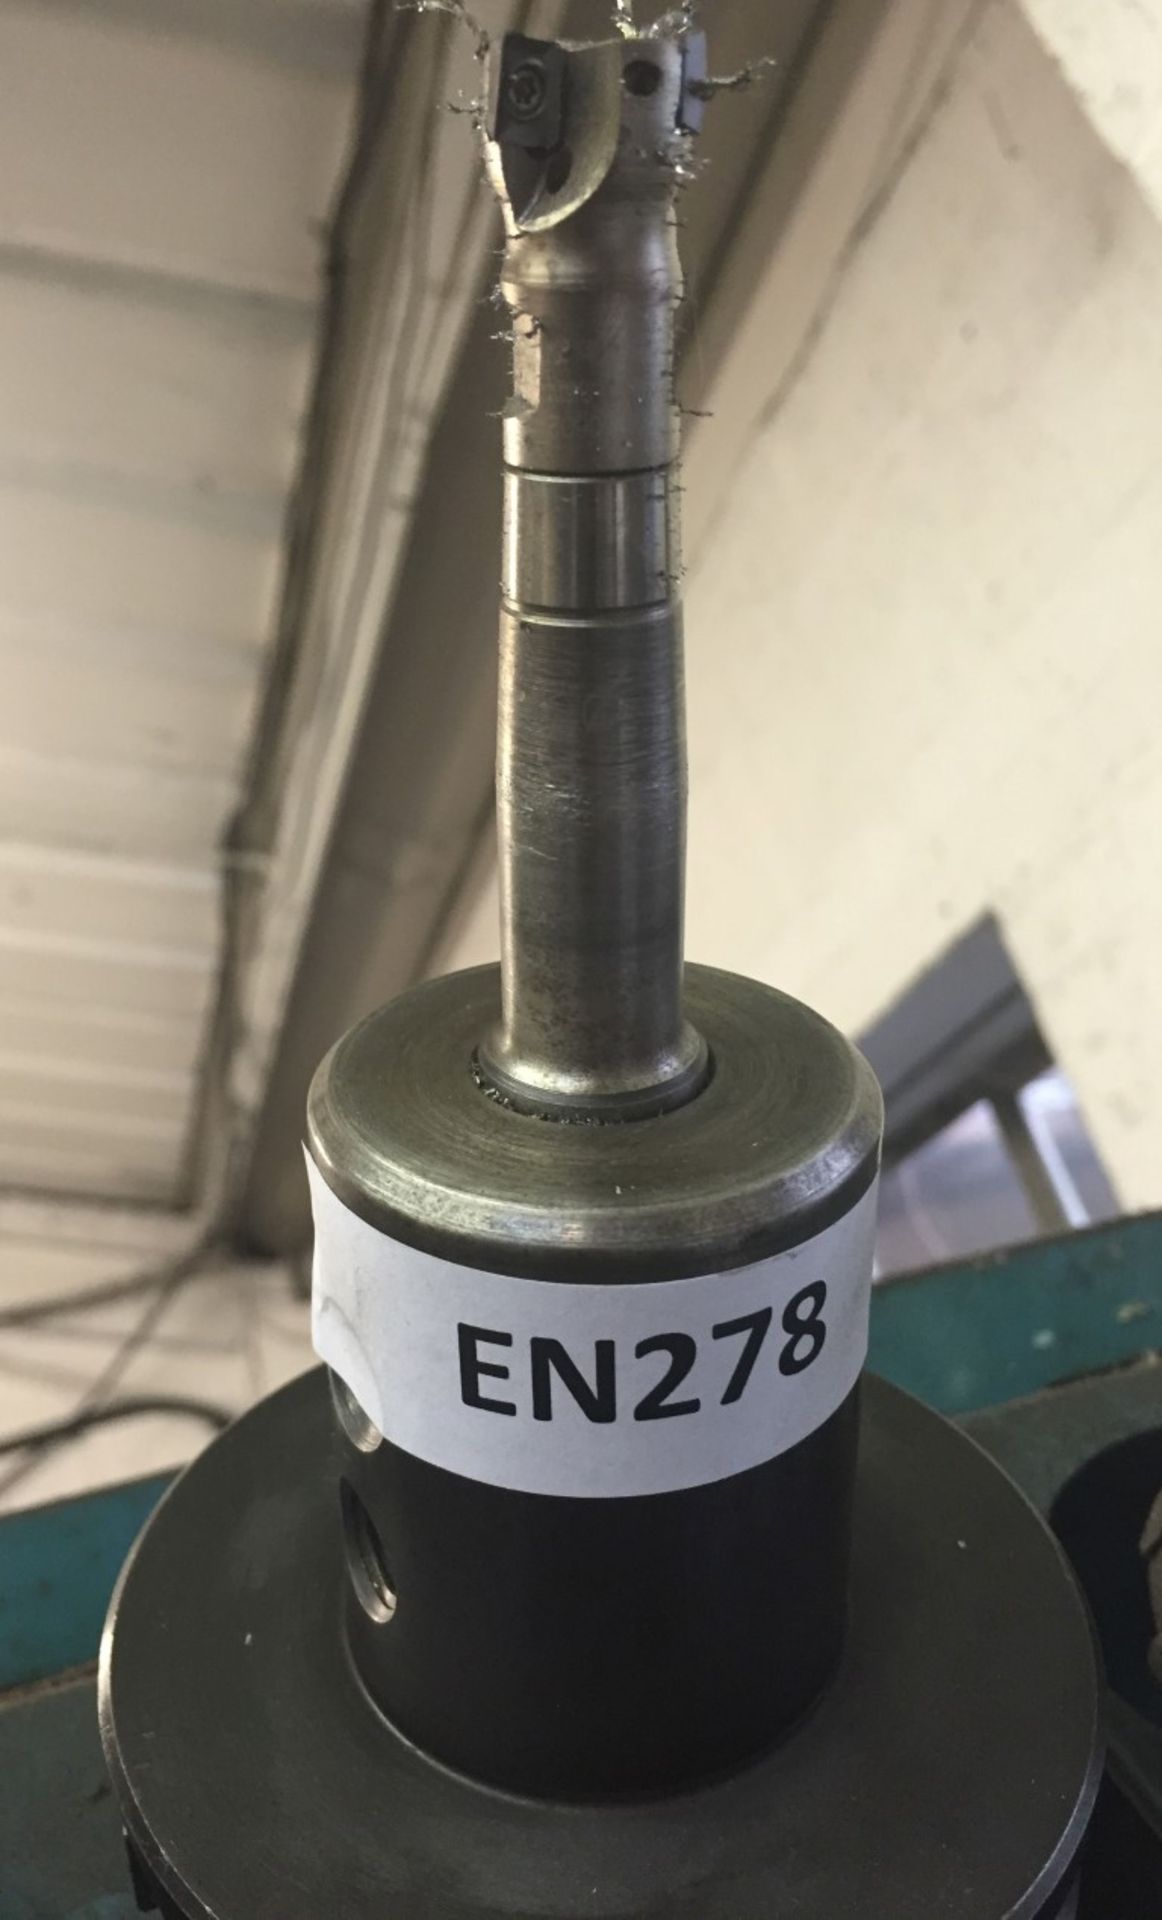 1 x CNC / VMC Mill Chuck and milling cutter - CL202 - Ref EN278 - Location: Altrincham WA14 - Image 2 of 3